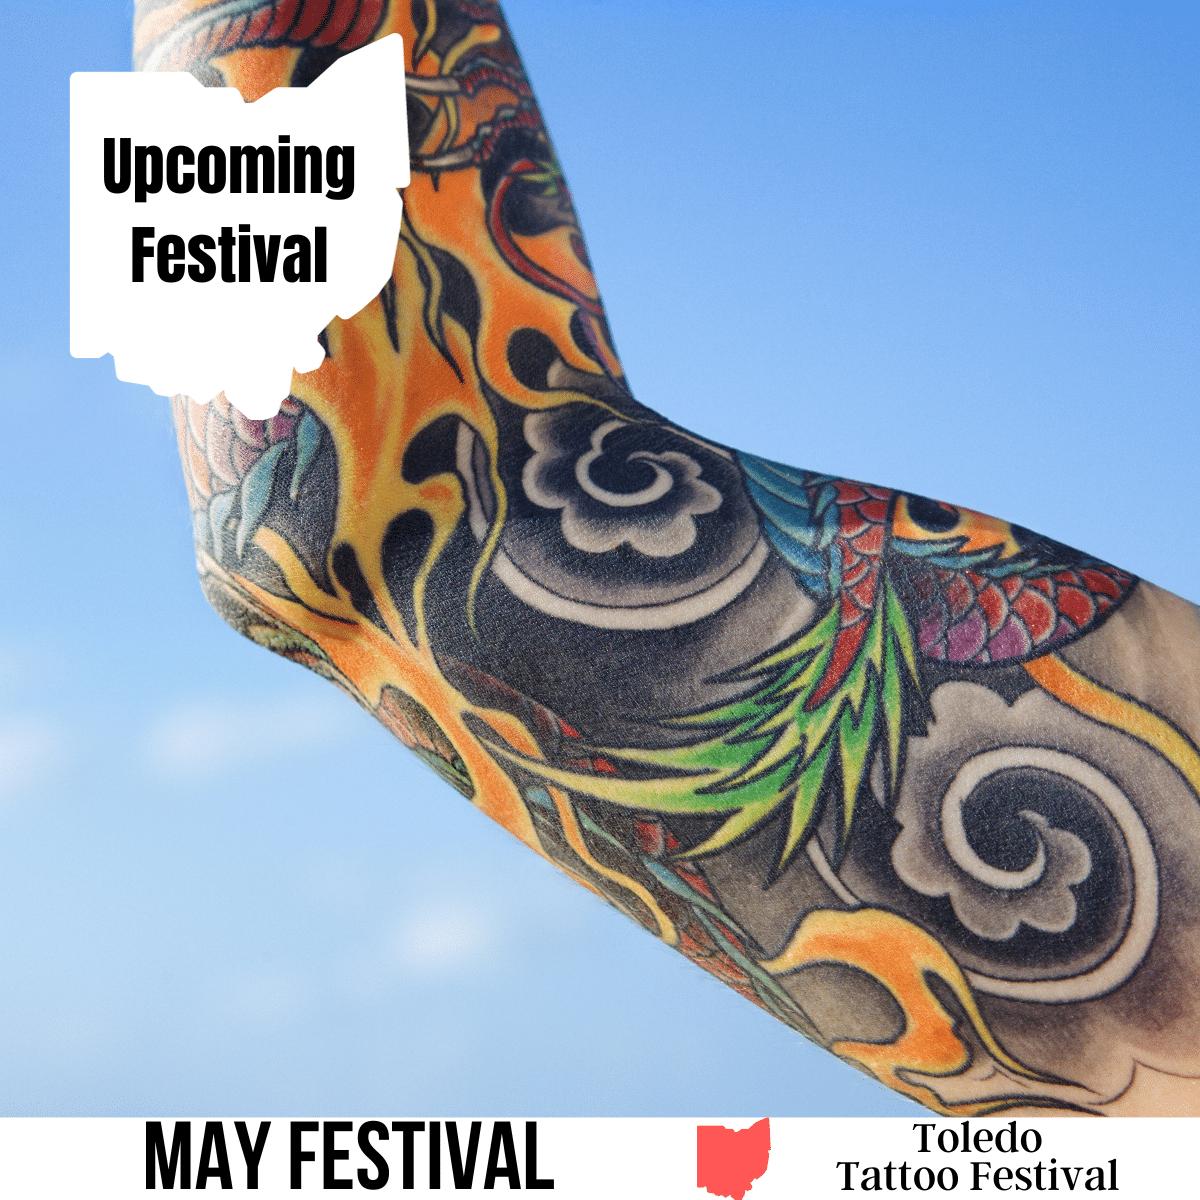 A square image of a photo of a colored arm sleeve tattoo against a blue sky background. A white strip across the bottom has text May Festival Toledo Tattoo Festival. A white image of Ohio in the upper left corner has text Upcoming Festival.